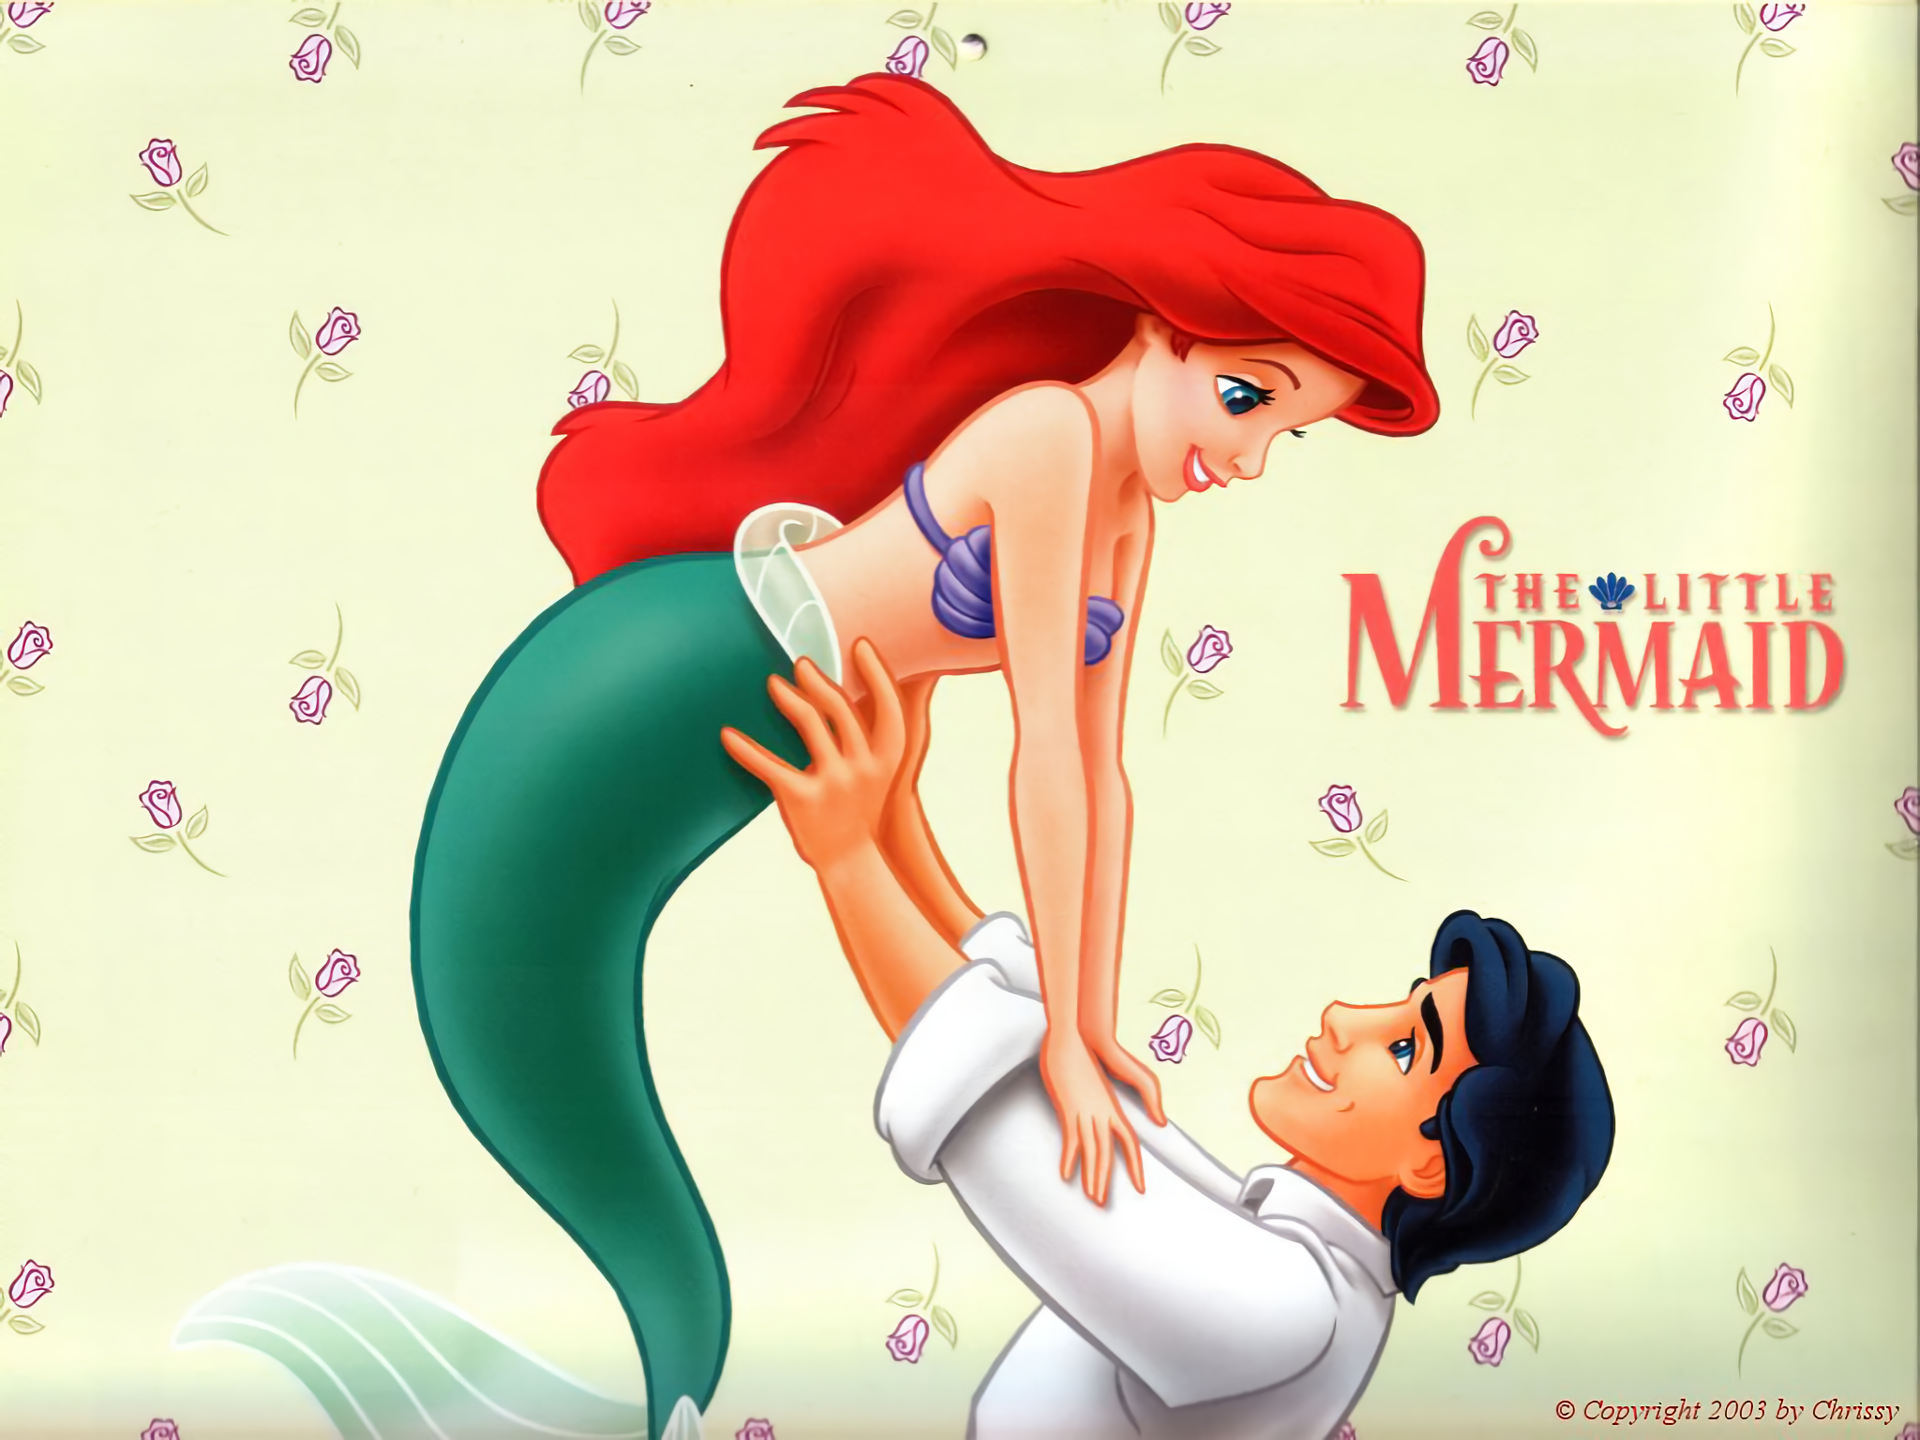 Disney's Ariel and Prince Eric, surrounded by vibrant colors, share a tender moment in this Little Mermaid wallpaper.